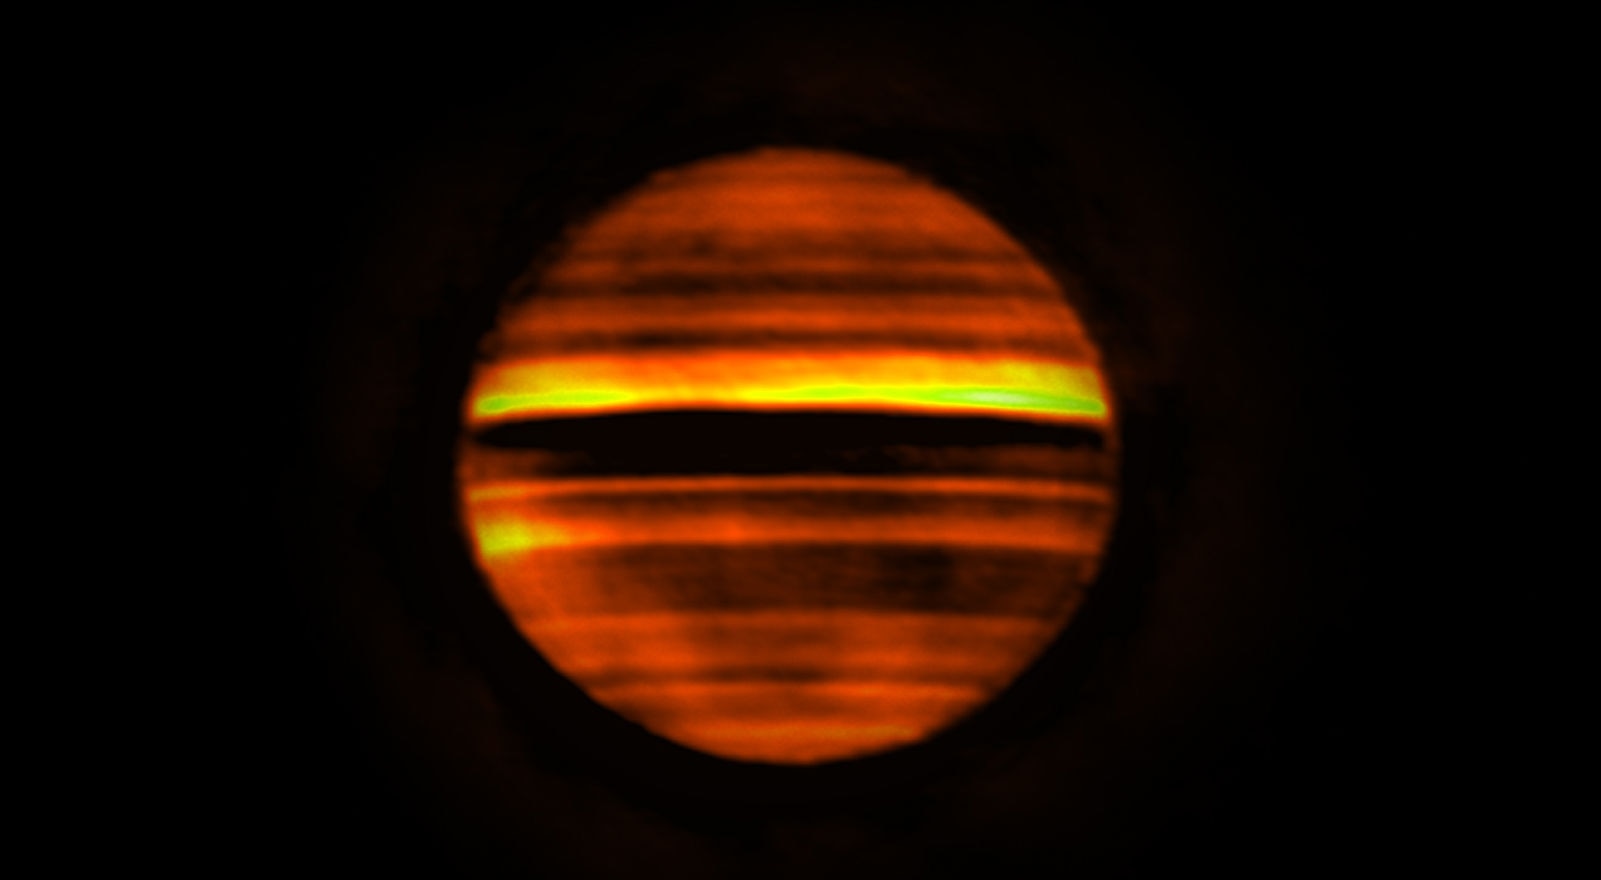 An image of Jupiter taken at different wavelengths by ALMA shows that the planet’s zones (bright) are warmer and belts (darker) cooler. Credit: ALMA (ESO/NAOJ/NRAO), I. de Pater et al.; NRAO/AUI NSF, S. Dagnello